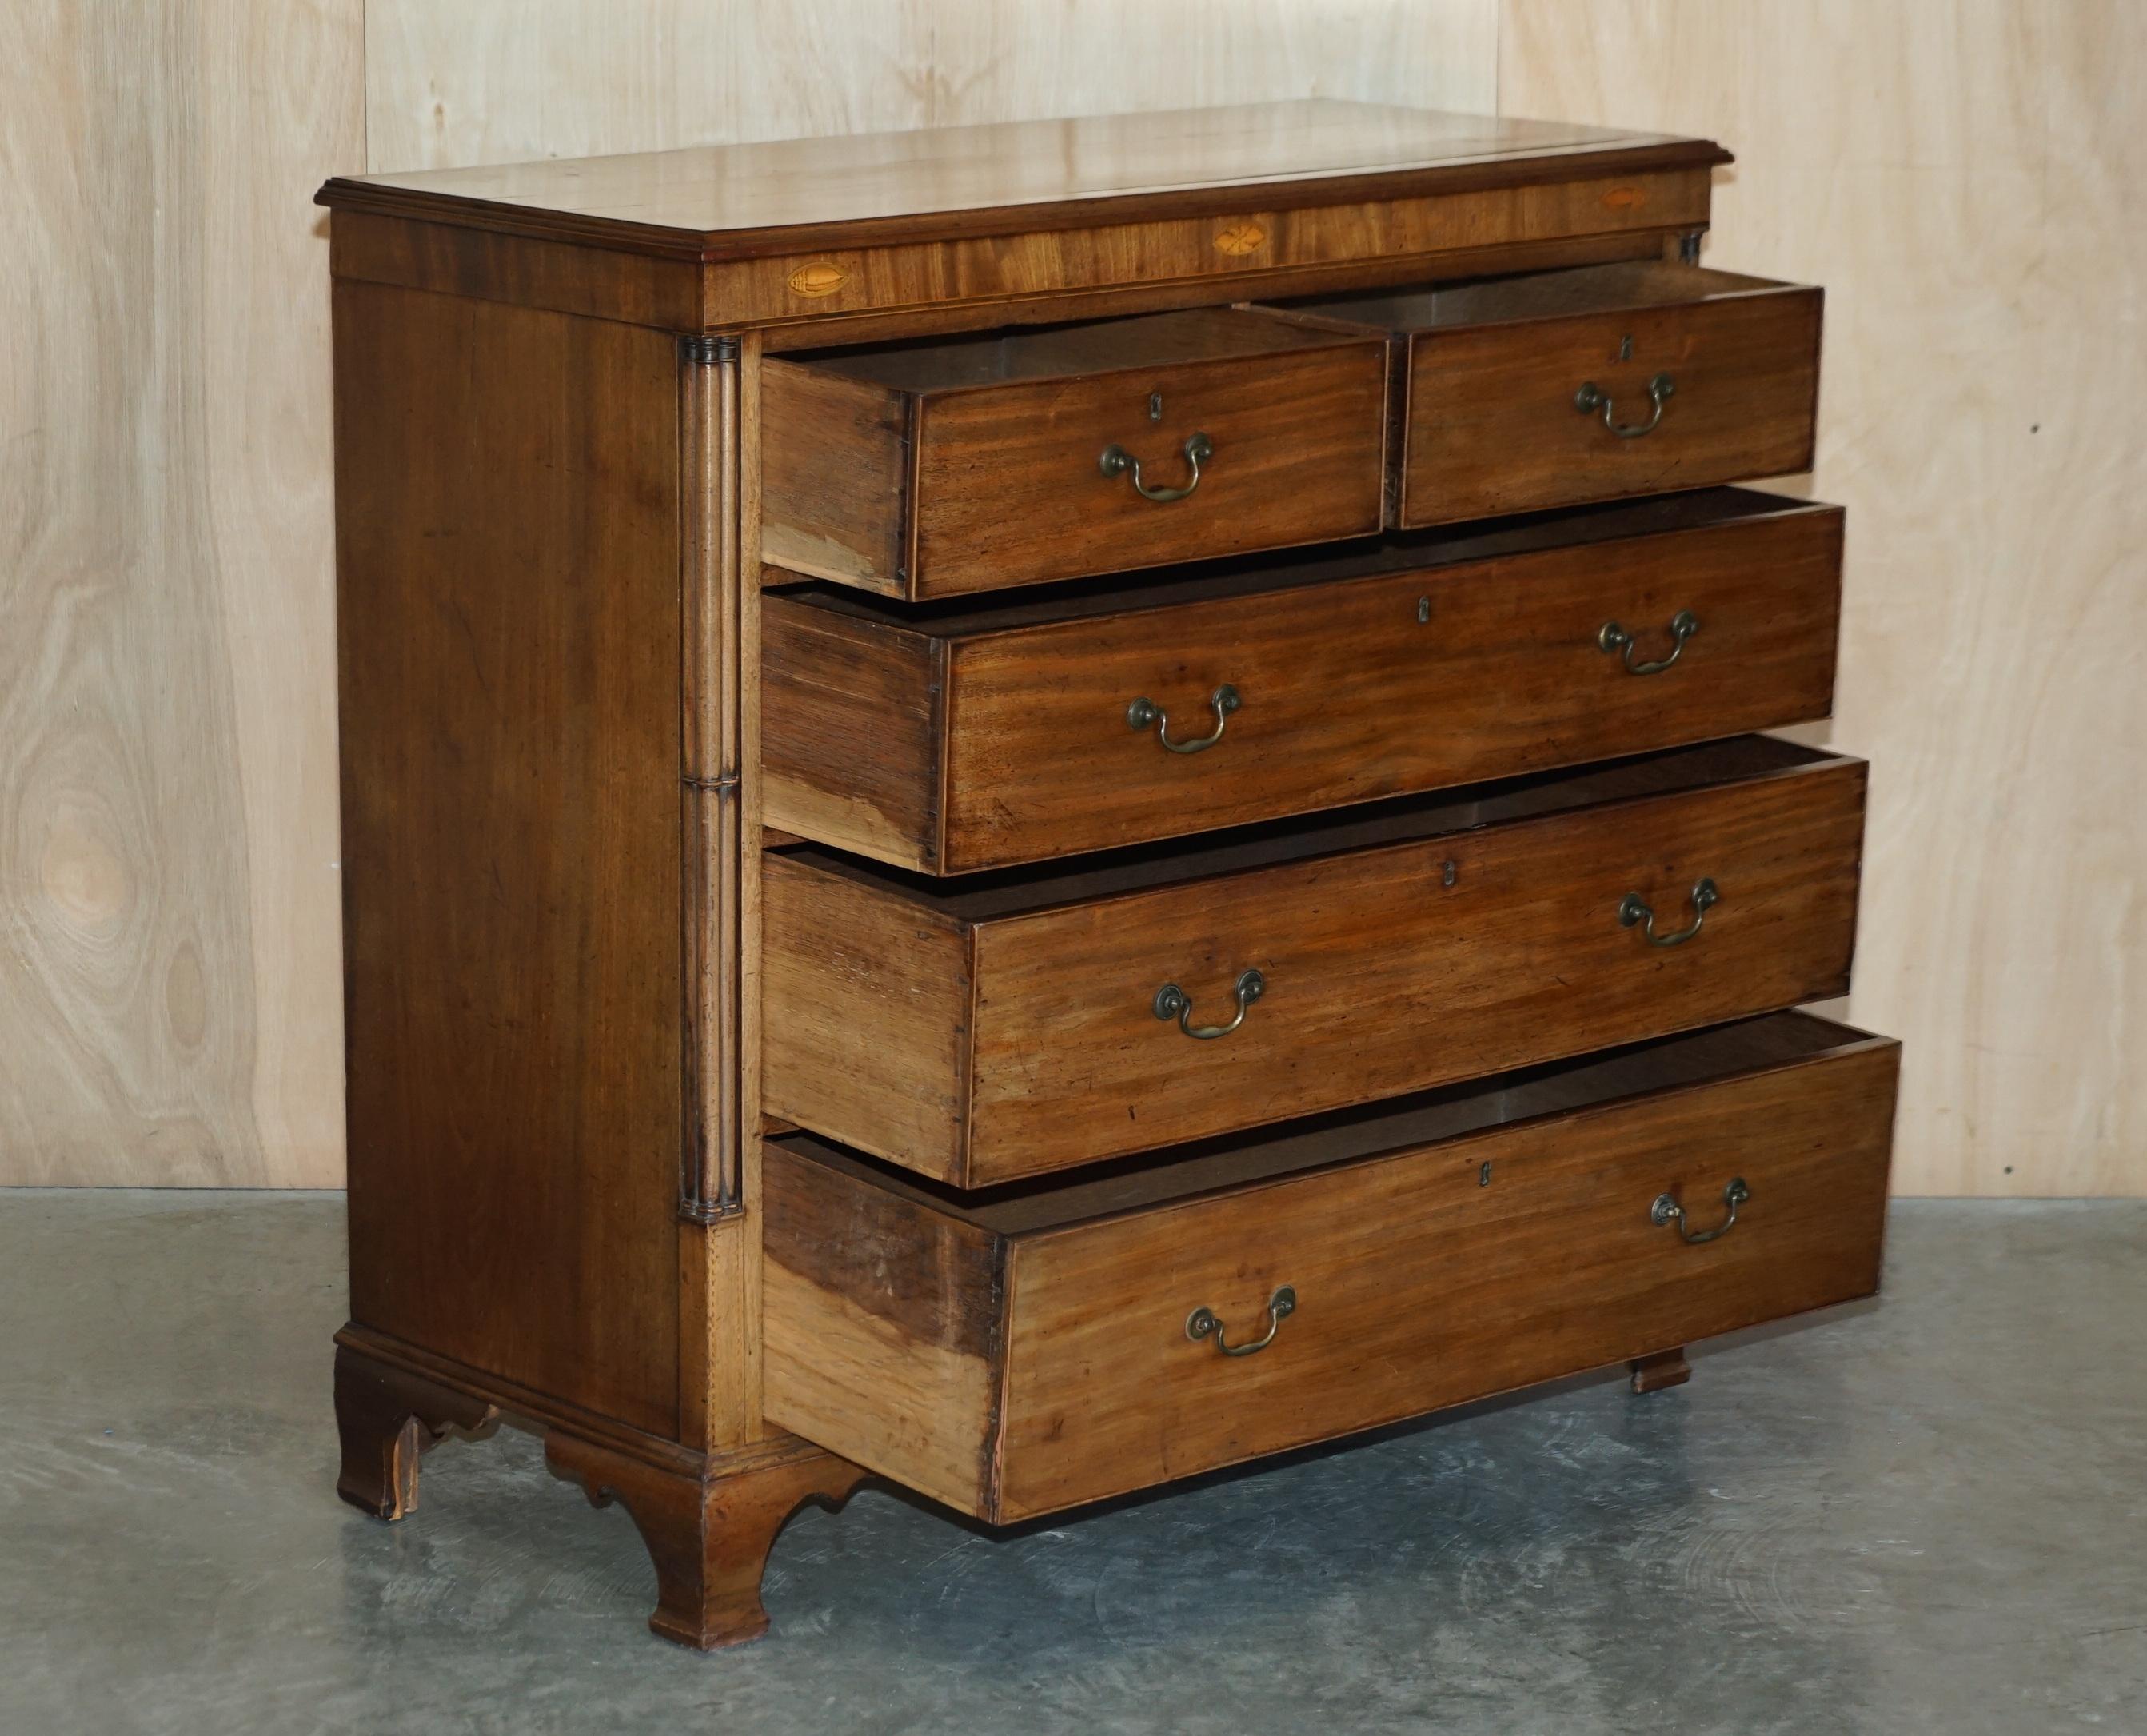 LARGE FiNE ANTIQUE THOMAS CHIPPENDALE SHERATON REVIVAL HARDWOOD CHEST OF DRAWERS im Angebot 10